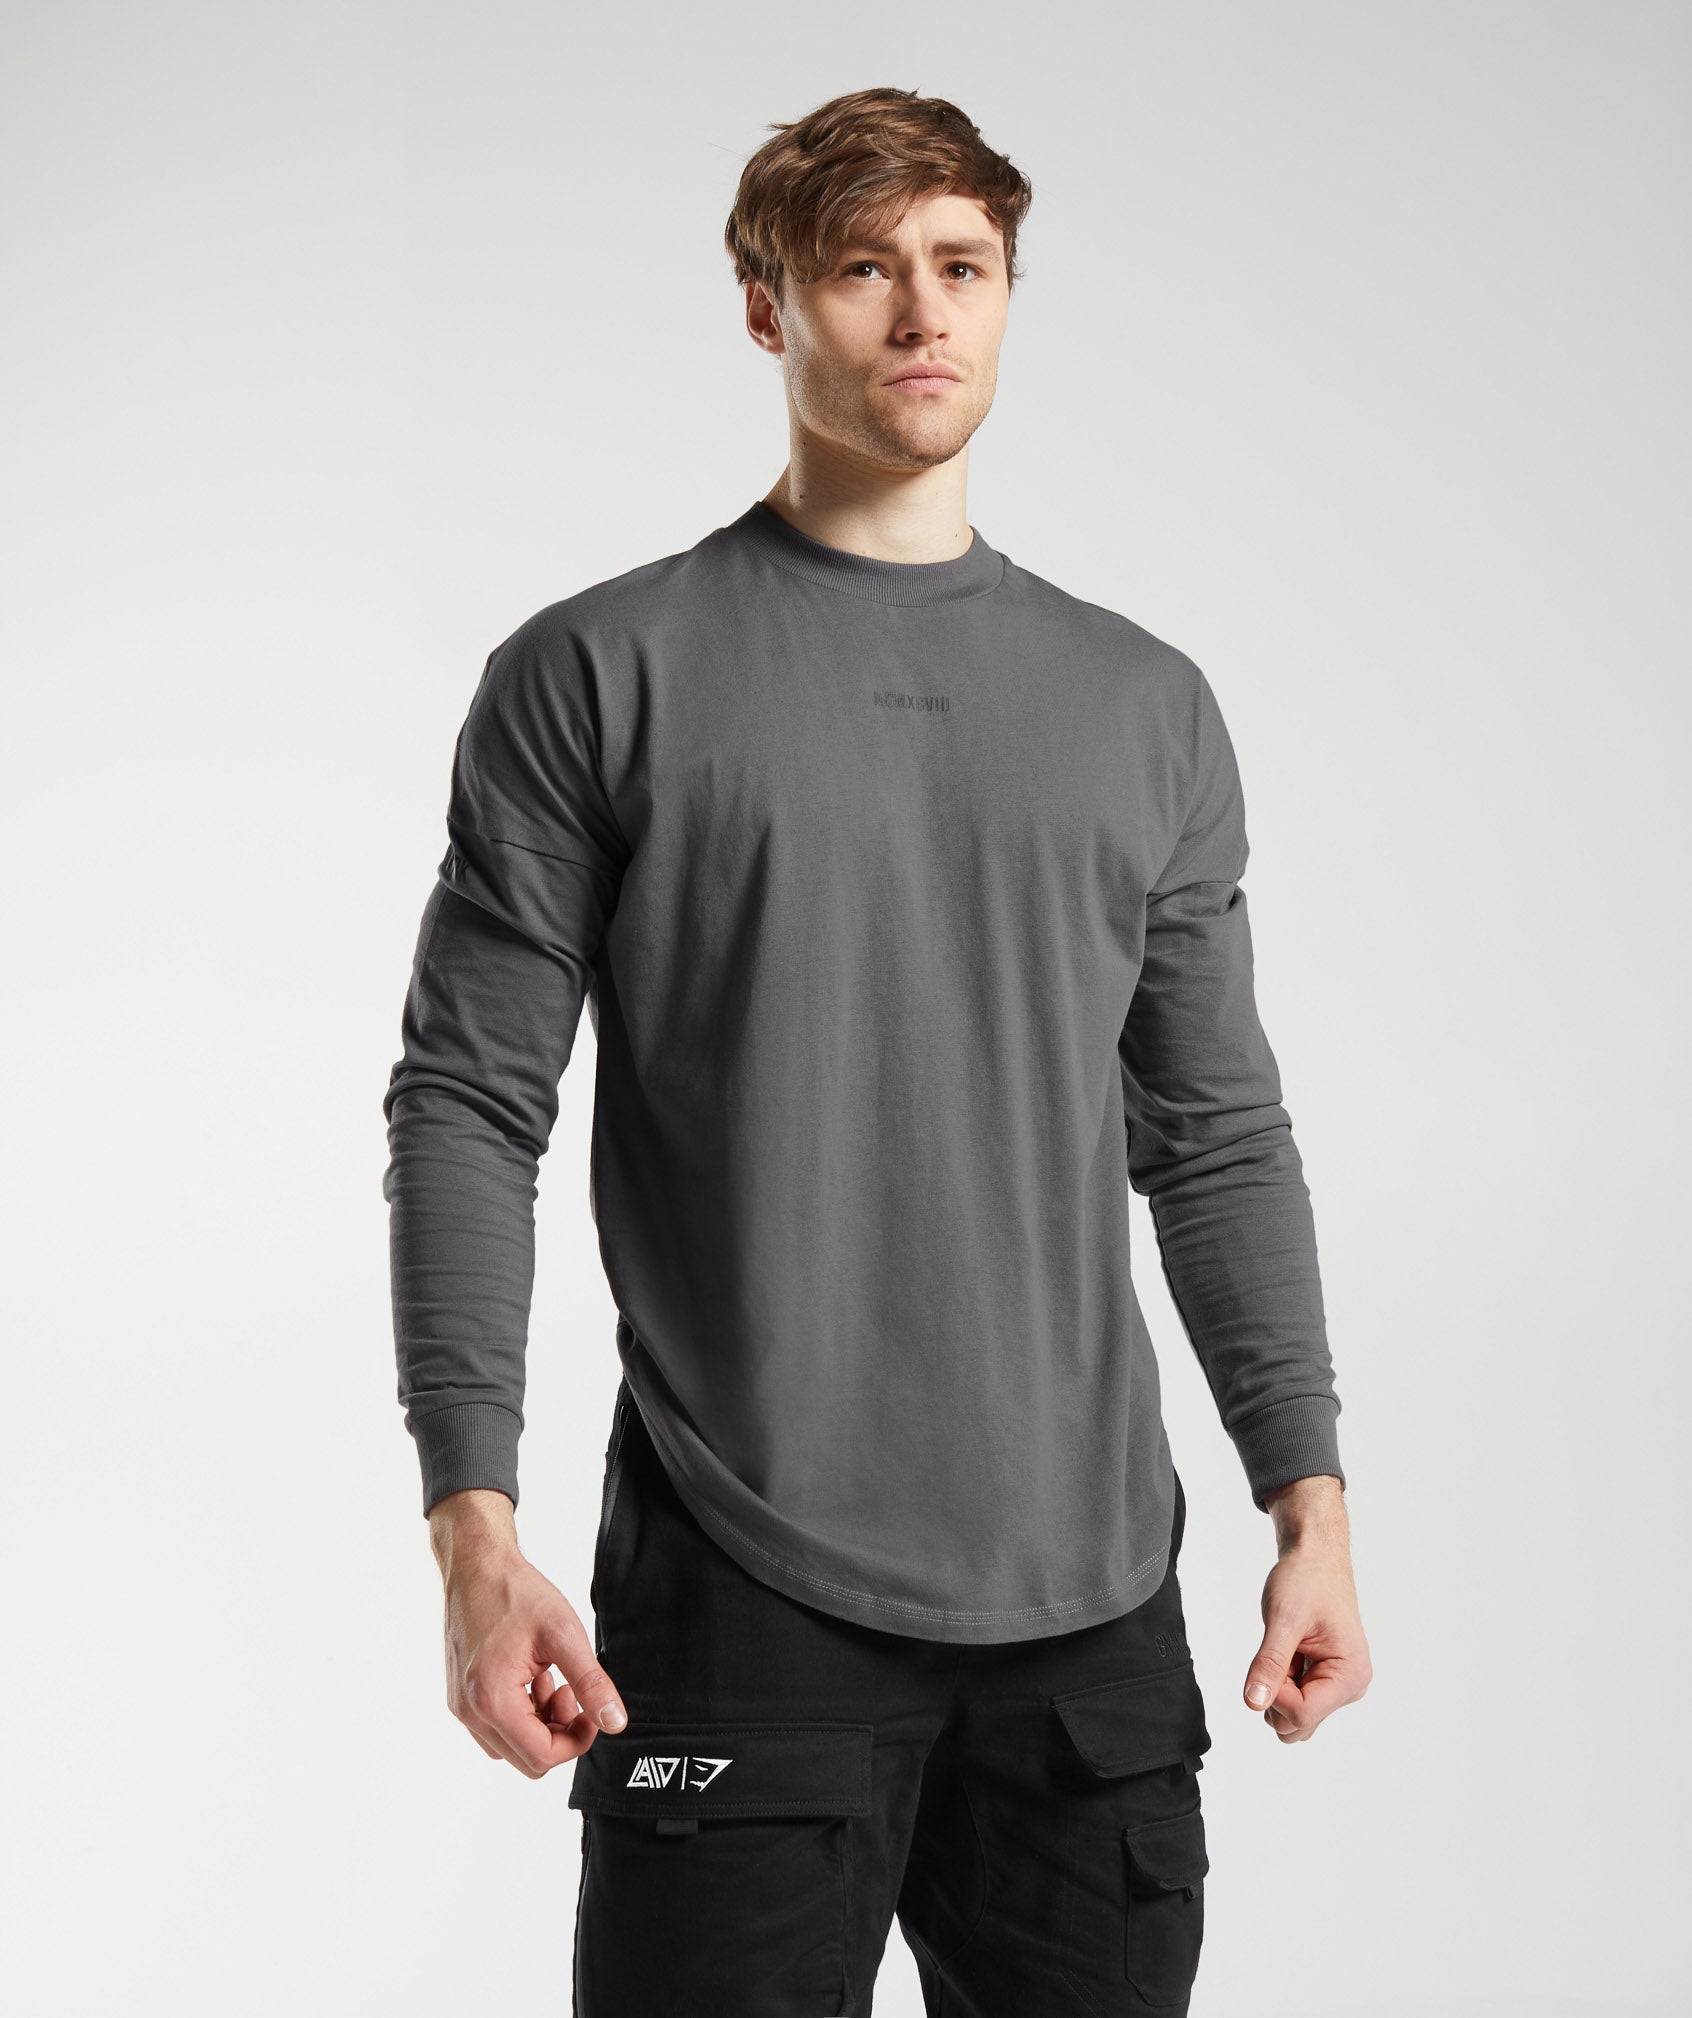 GS x David Laid Oversized Long Sleeve T-Shirt in Wolf Grey - view 1